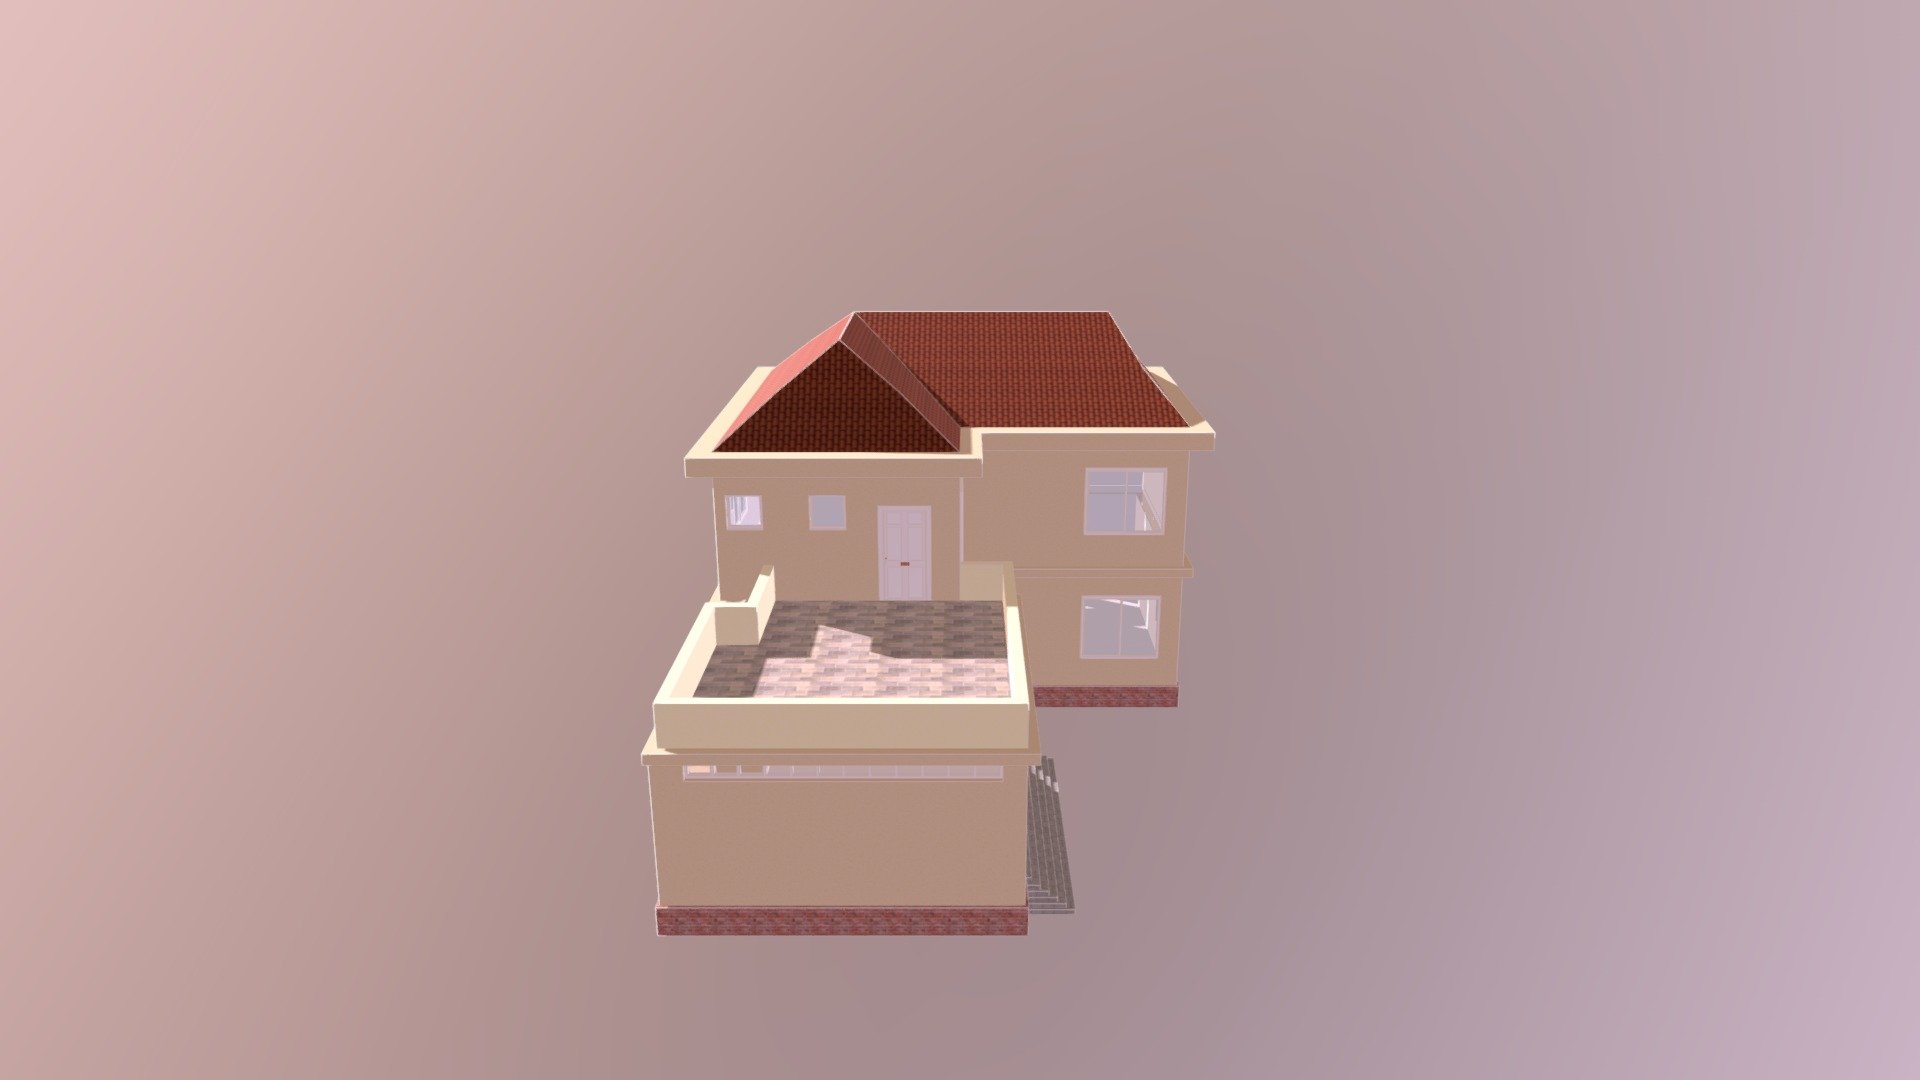 Pubg House 1 Download Free 3d Model By Kma89 Kma89 F049cd3